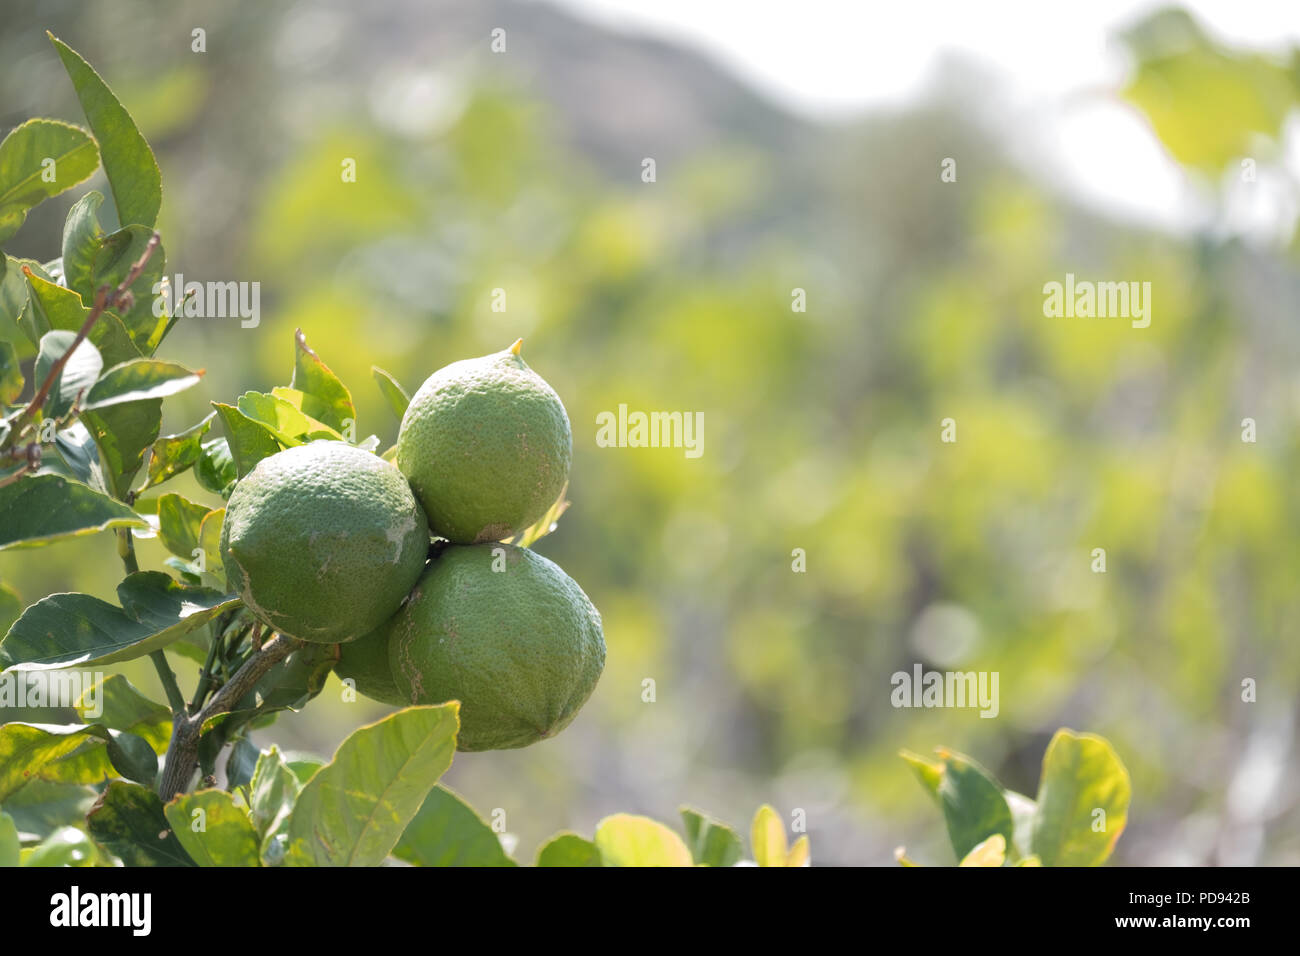 Green lemons on tree in sunshine, Citrus limon (L.) Osbeck, from the flowering plant family Rutaceae, now sold in Tesco, Saronida, Greece. Stock Photo